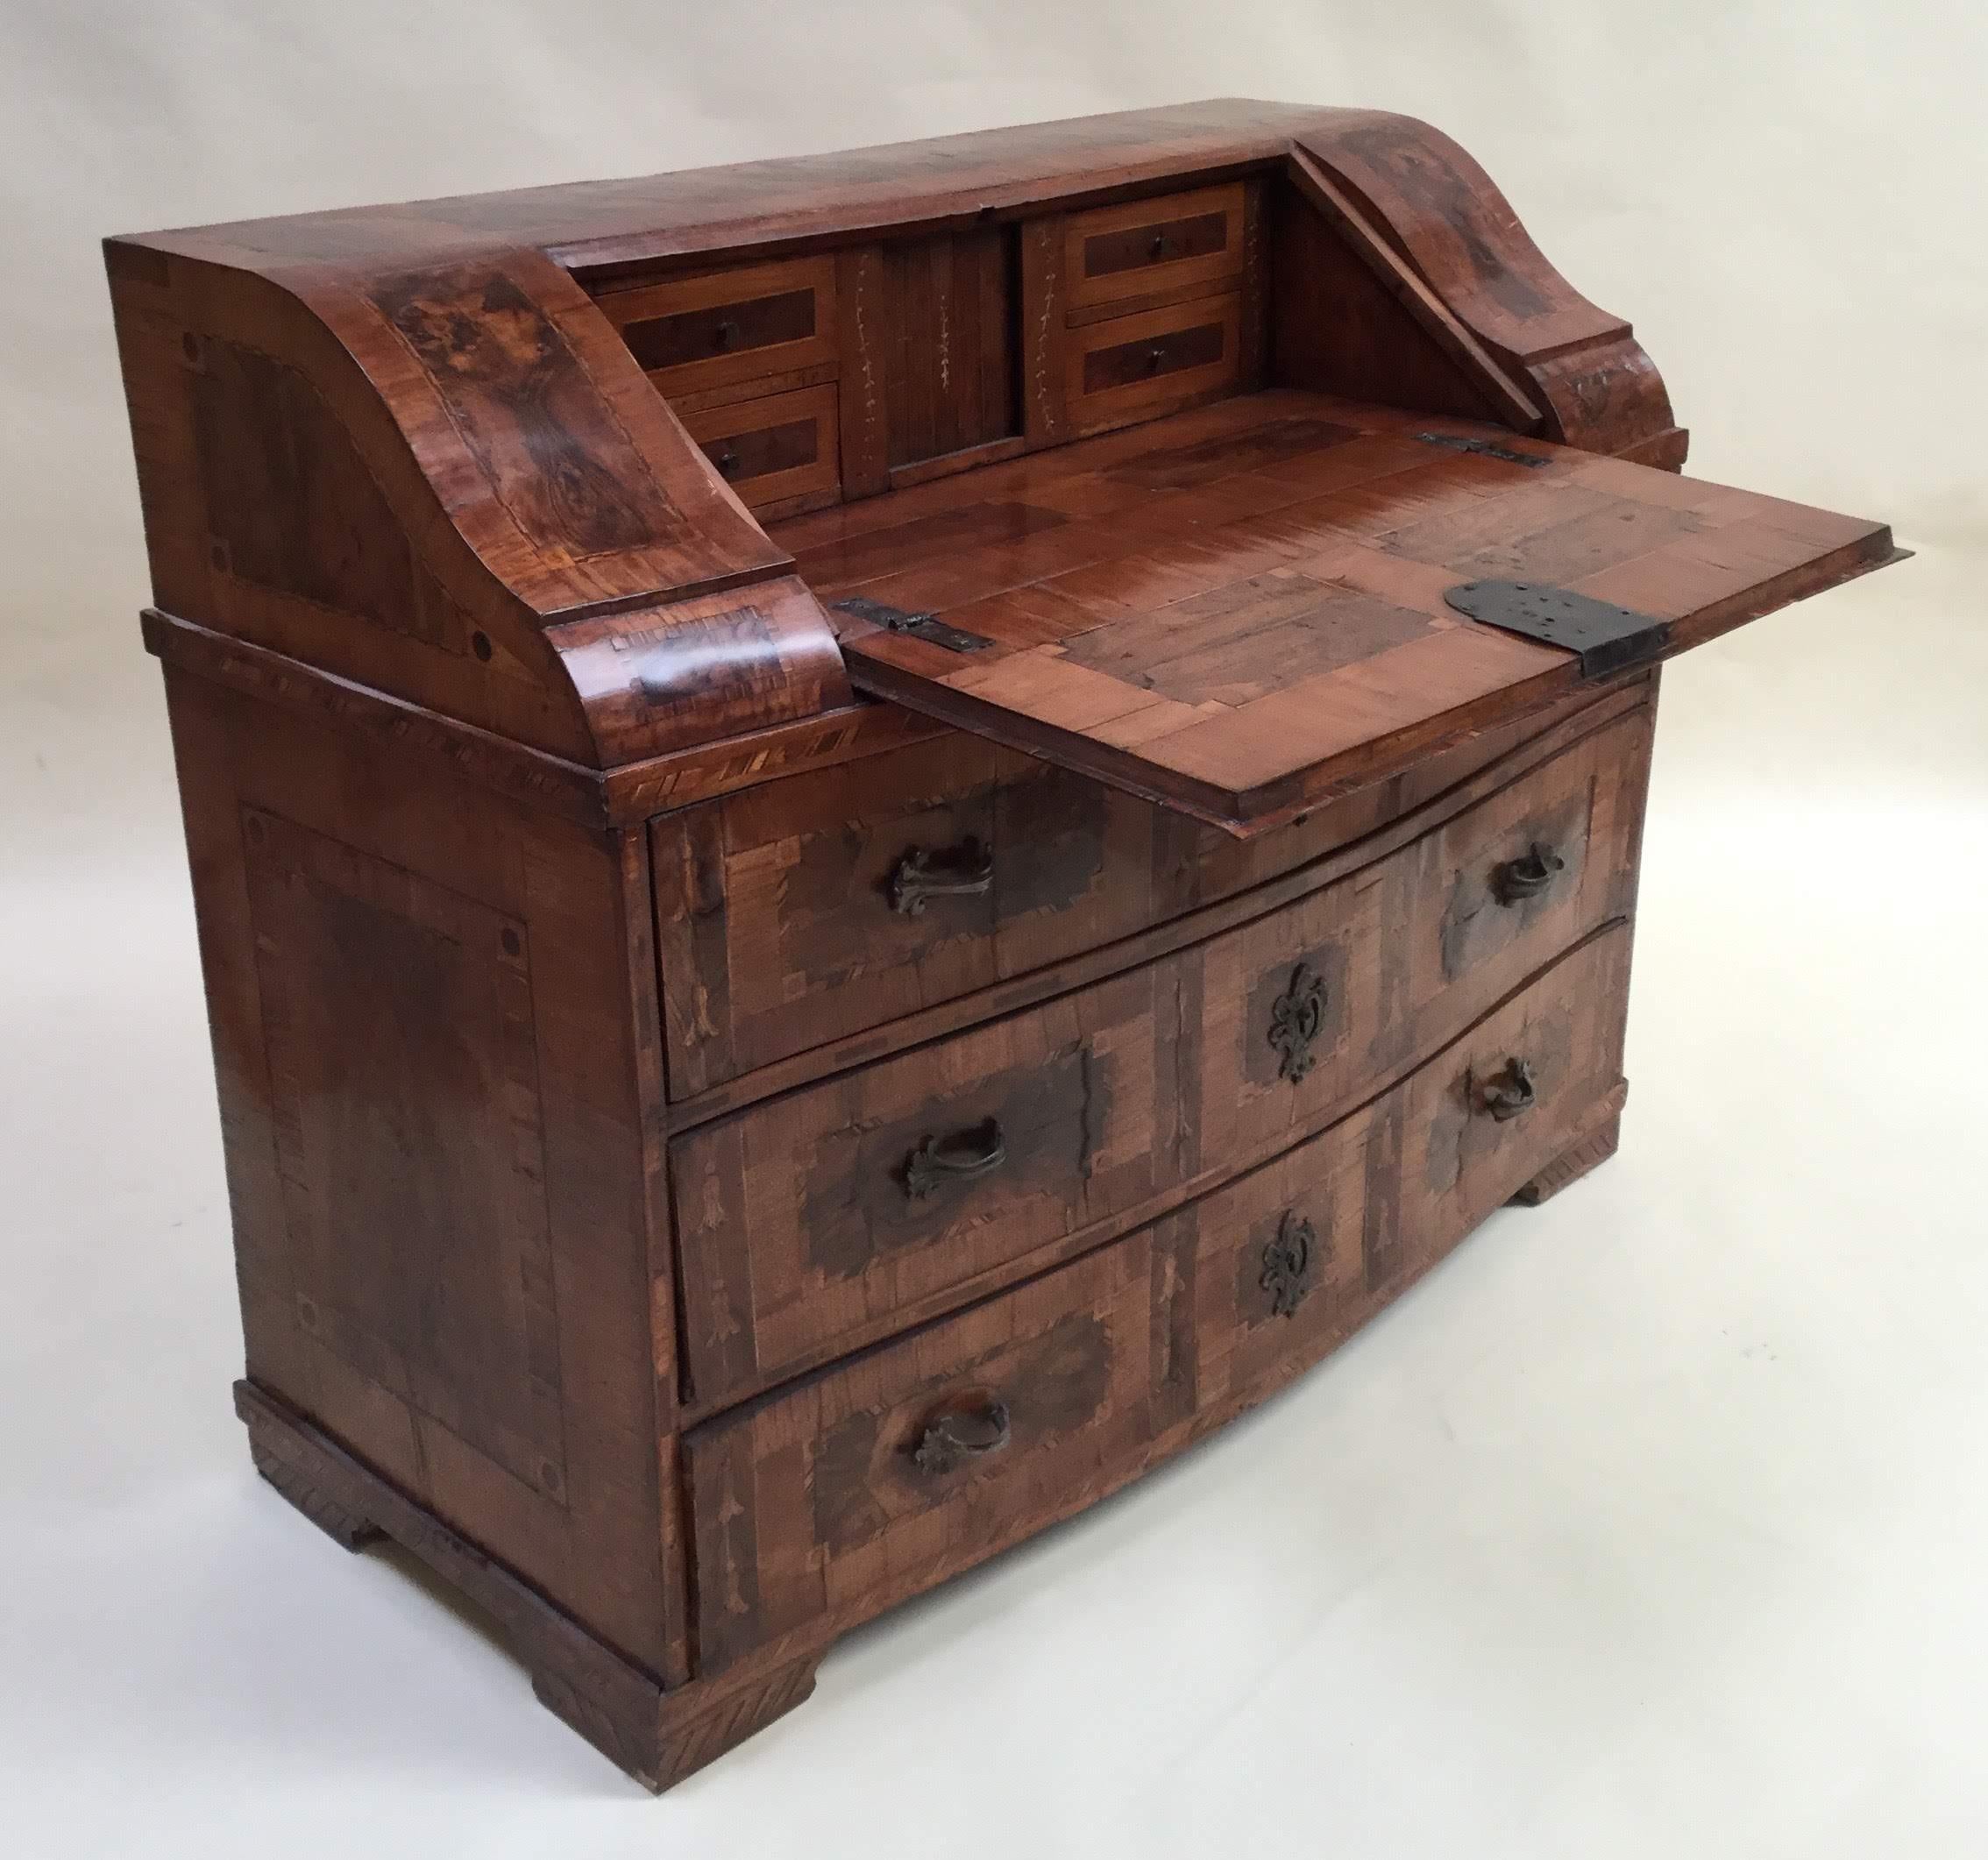 Italian walnut desk with olivewood book match veneering and marquetry inlay.
The upper section with a slatted front, fitted interior, four small drawers and central compartment underneath writing surface. The lower section with three long drawers,